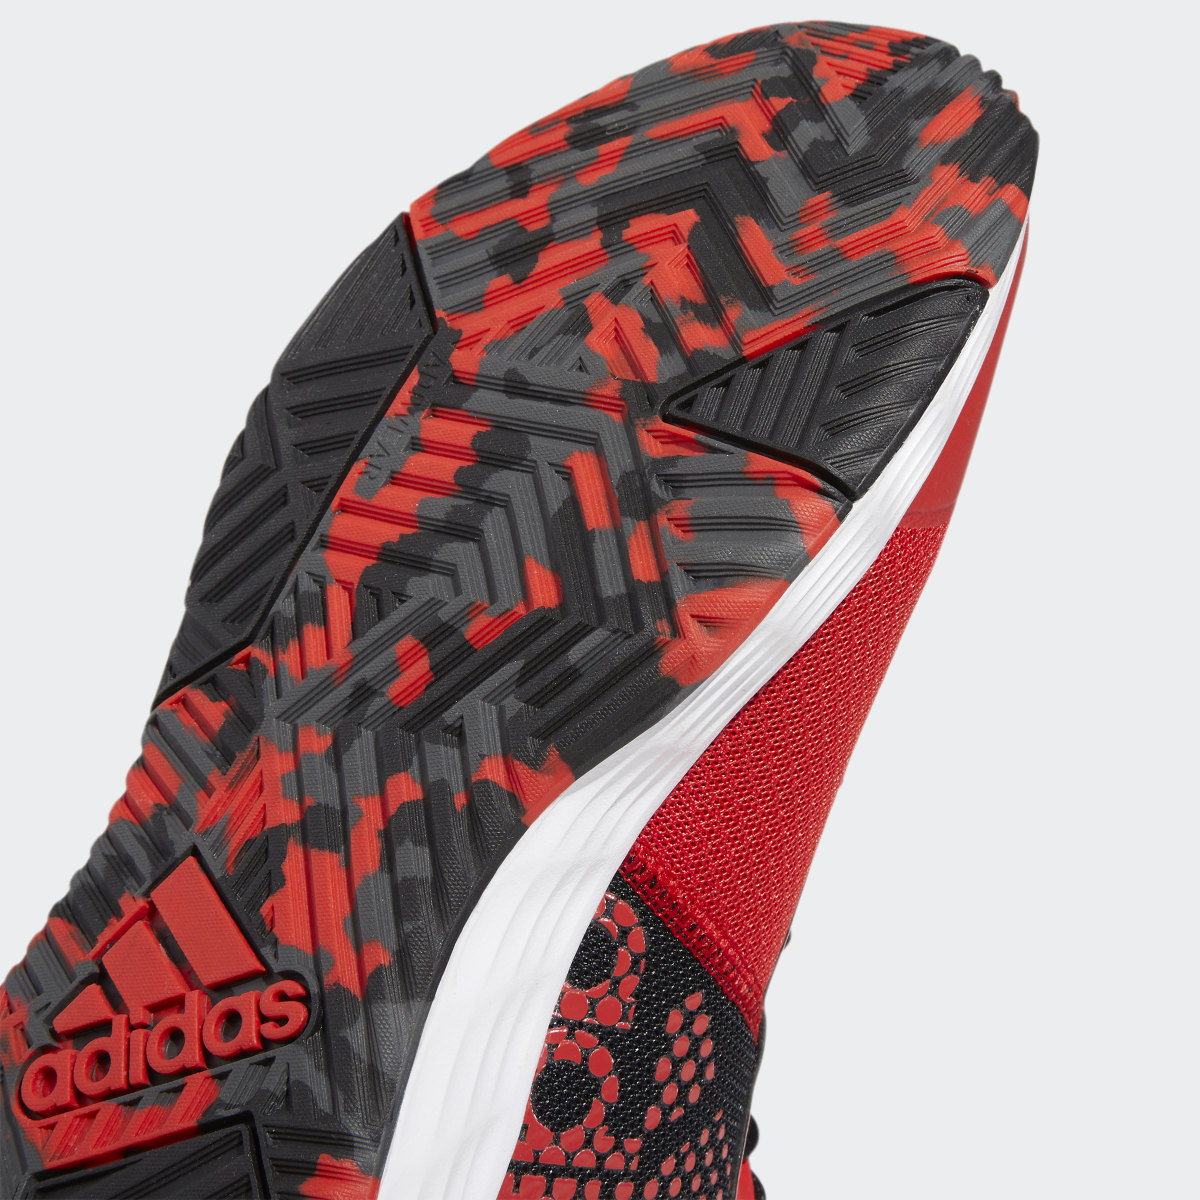 Adidas Ownthegame Basketball Shoes. 9